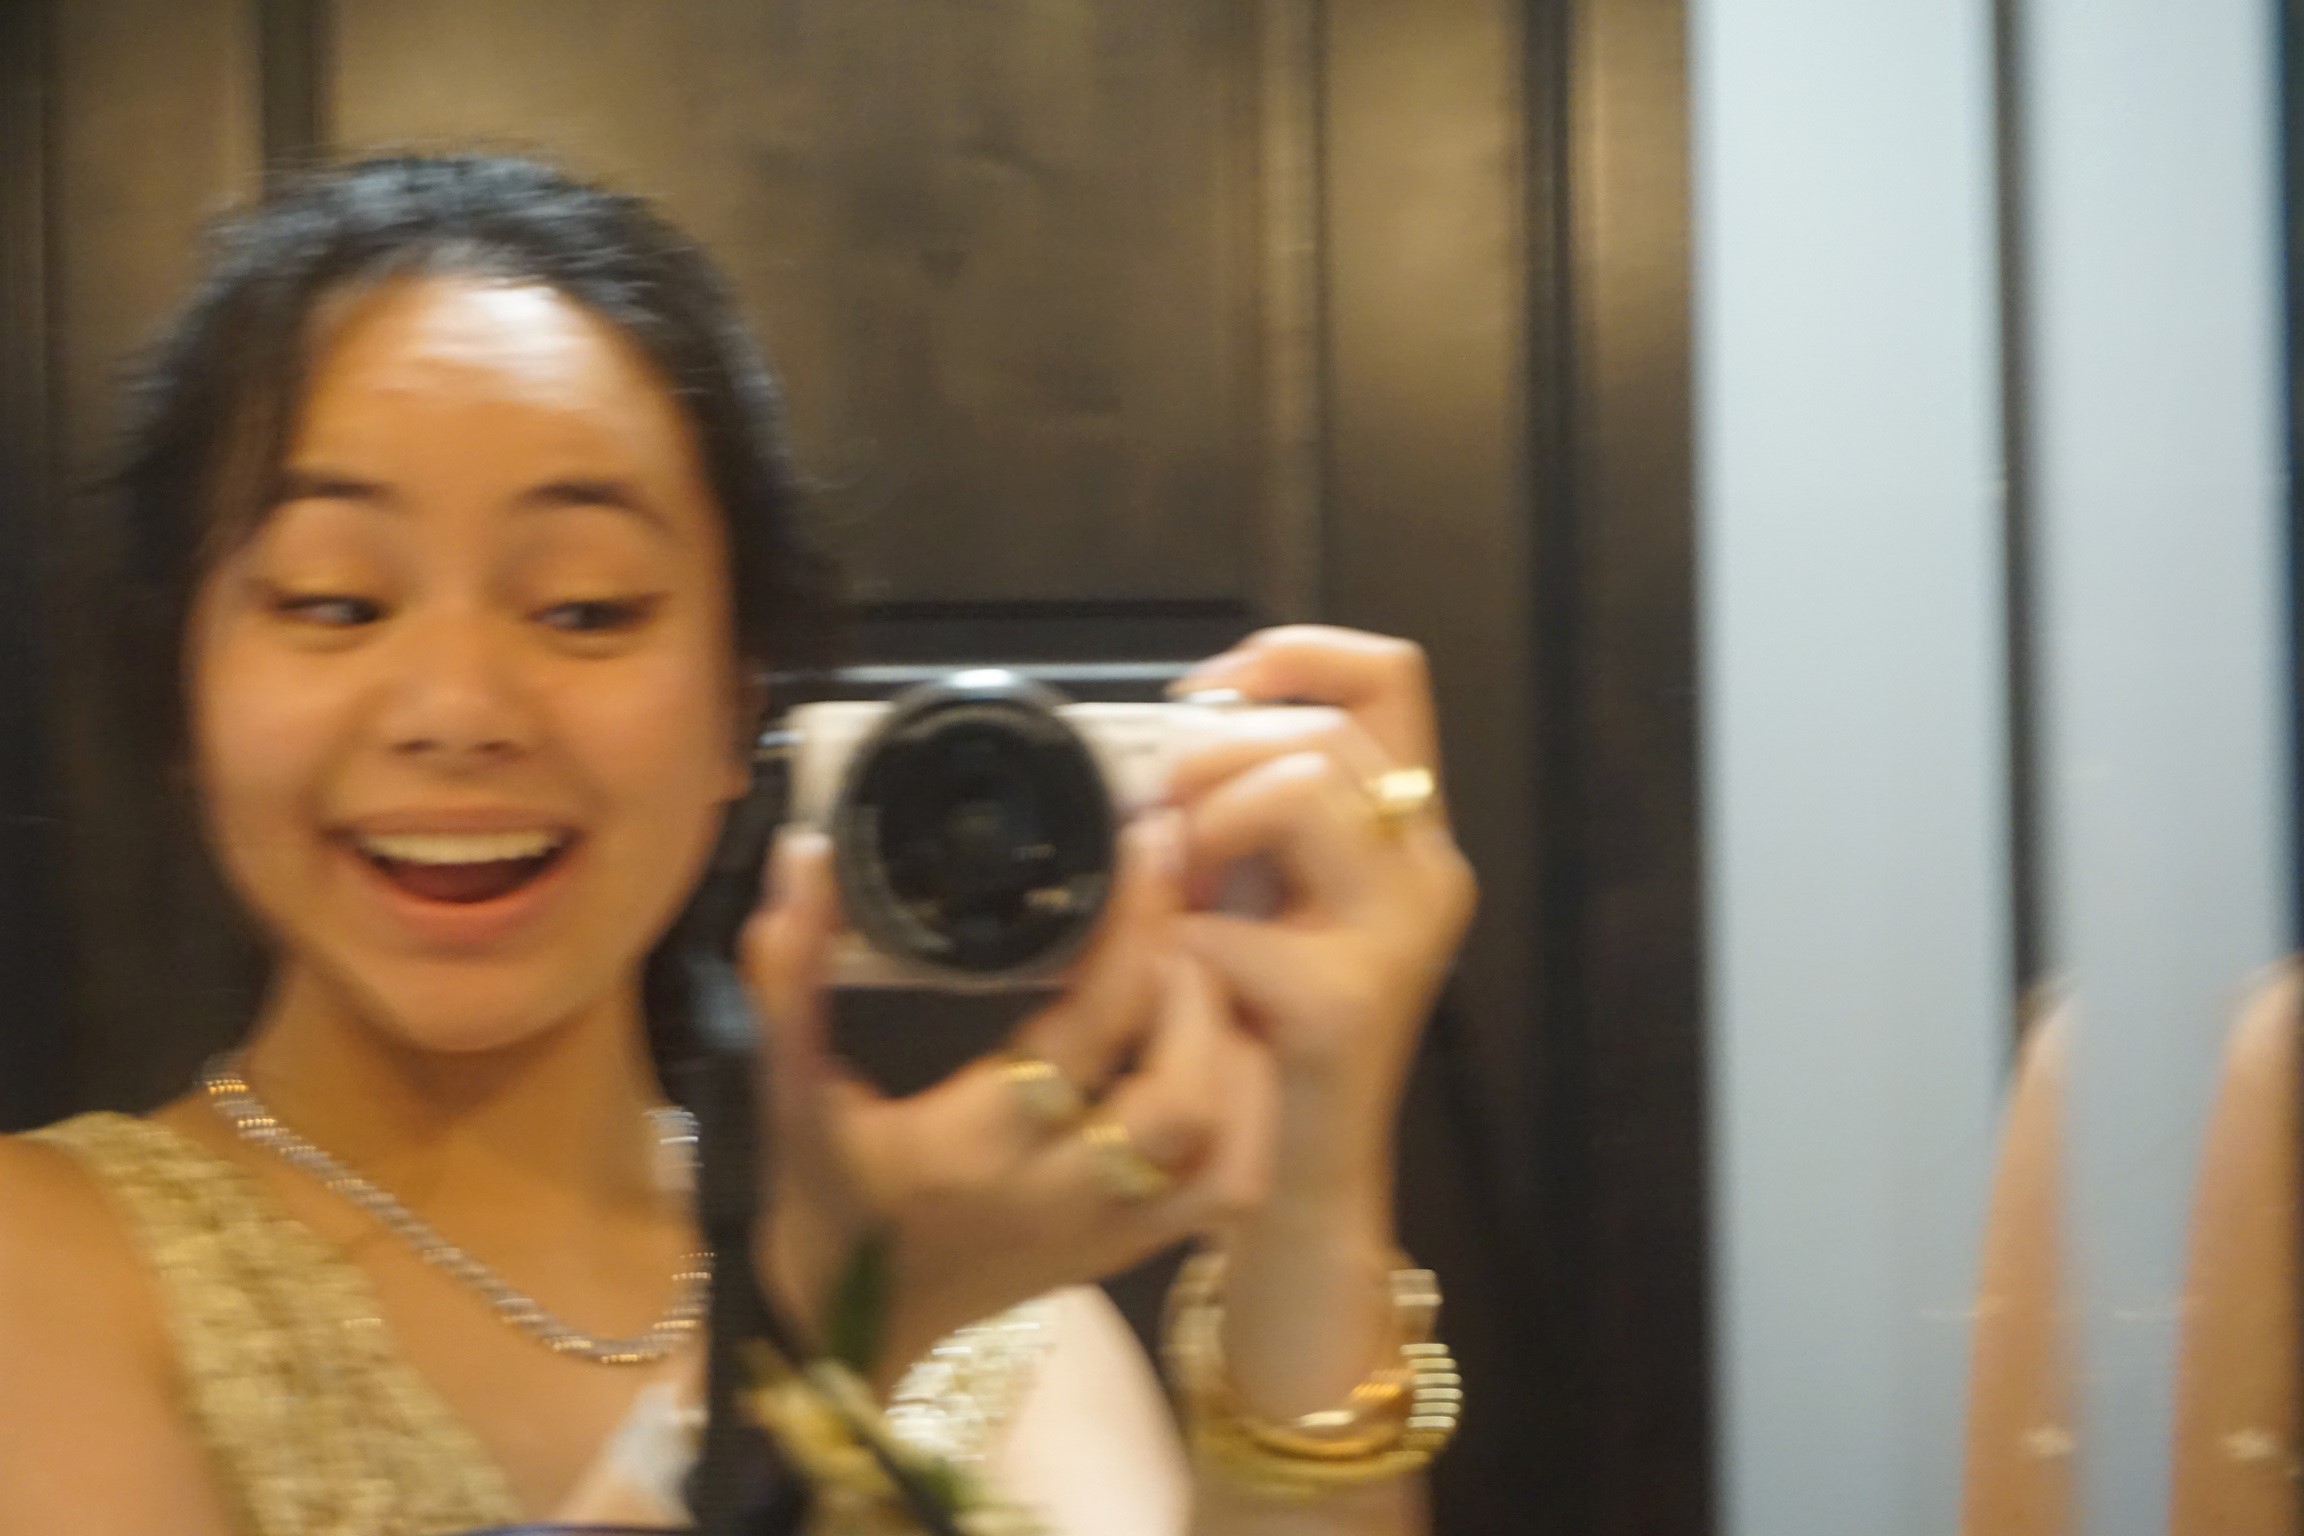 gabby taking a picture with my camera in the mirror